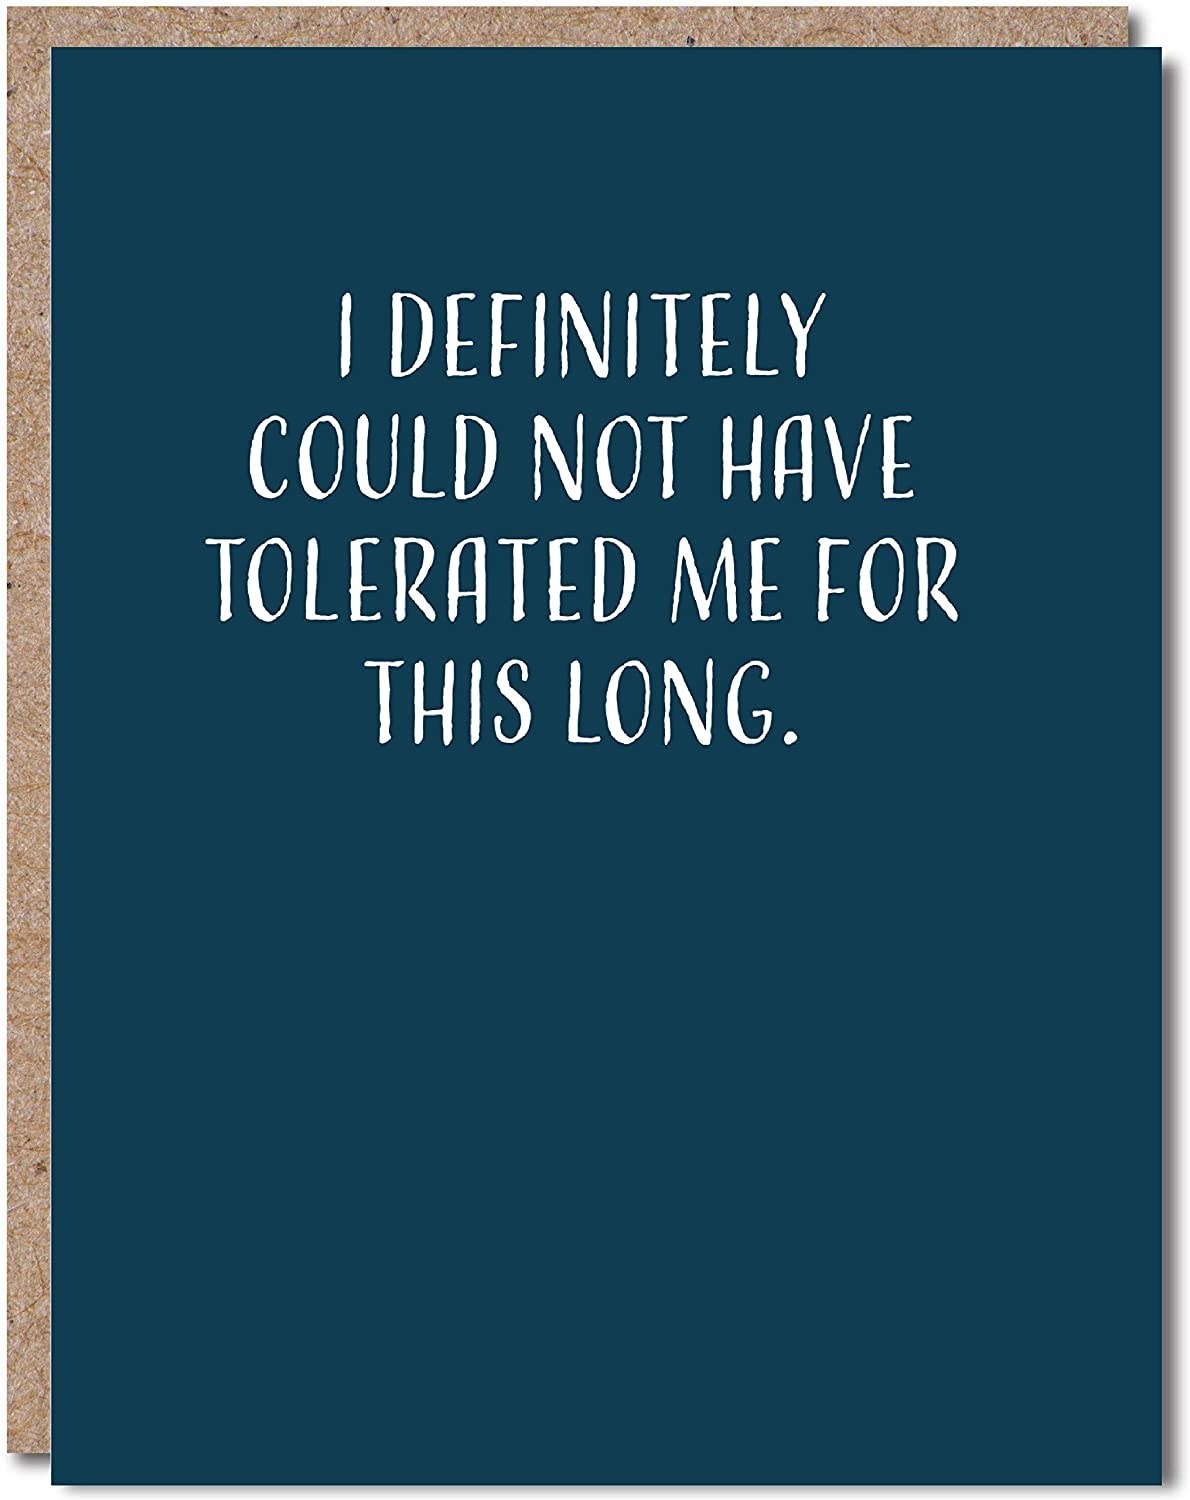 A blue card that says &quot;I definitely could not have tolerated me for this long&quot; in white